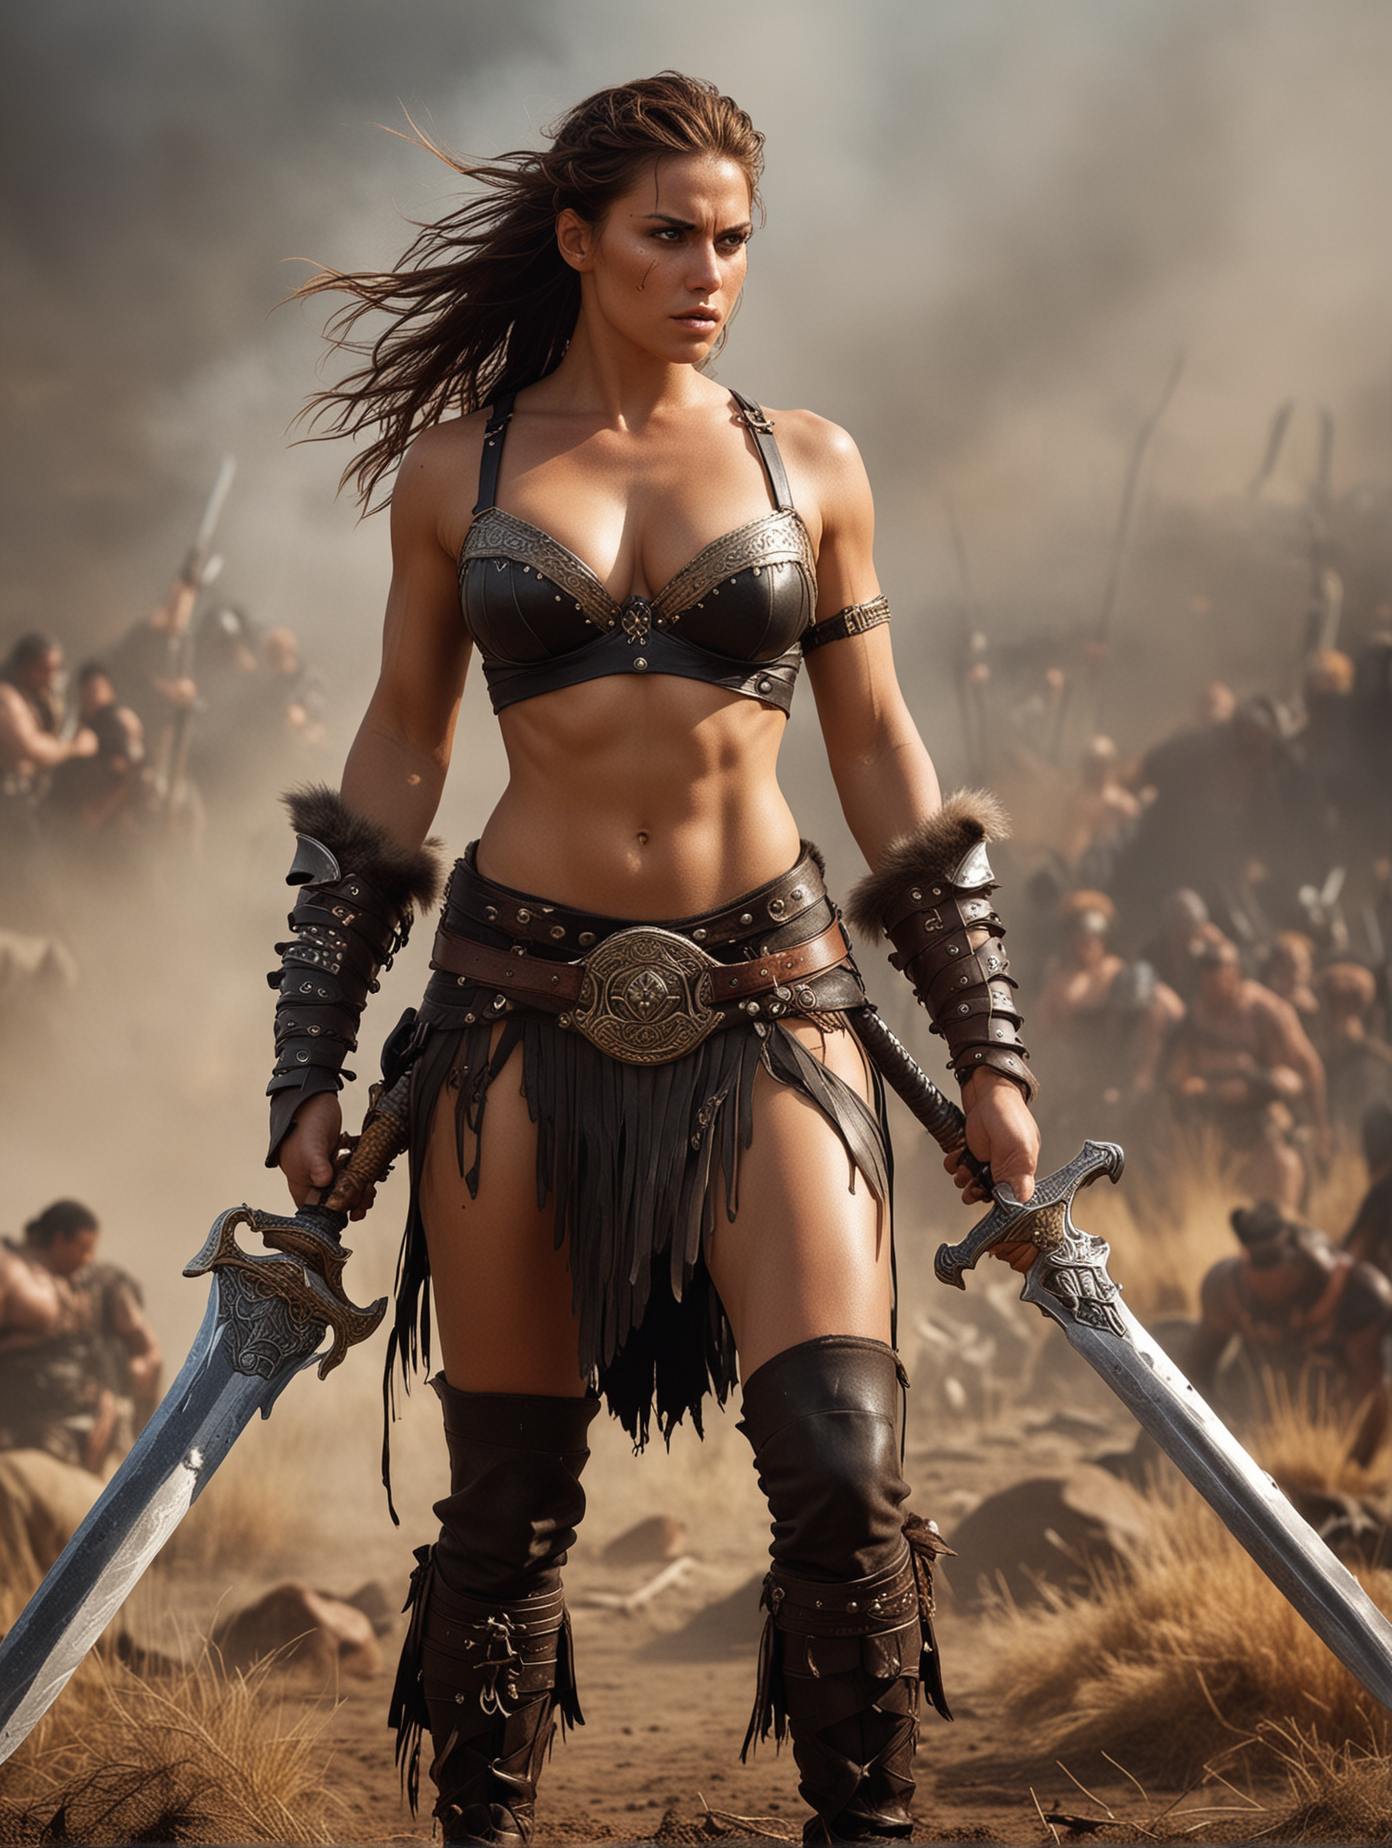 full-length high-resolution photograph of a Barbarian Woman:
Description: A very muscular warrior, wearing reinforced leather armor and tribal ornaments. braided hair, very large breasts, cleavage, amber colored eyes, She wields a massive sword with impressive agility, standing in a battlefield amid a battle, leather wrapped fur boots, ready to cleave through her opponents with fierce determination. muscular legs, ultra detailed, natural lighting, high contrast, ray tracing, random details, imperfection, skin texture, skin pores, fire, smoke, dark vignette